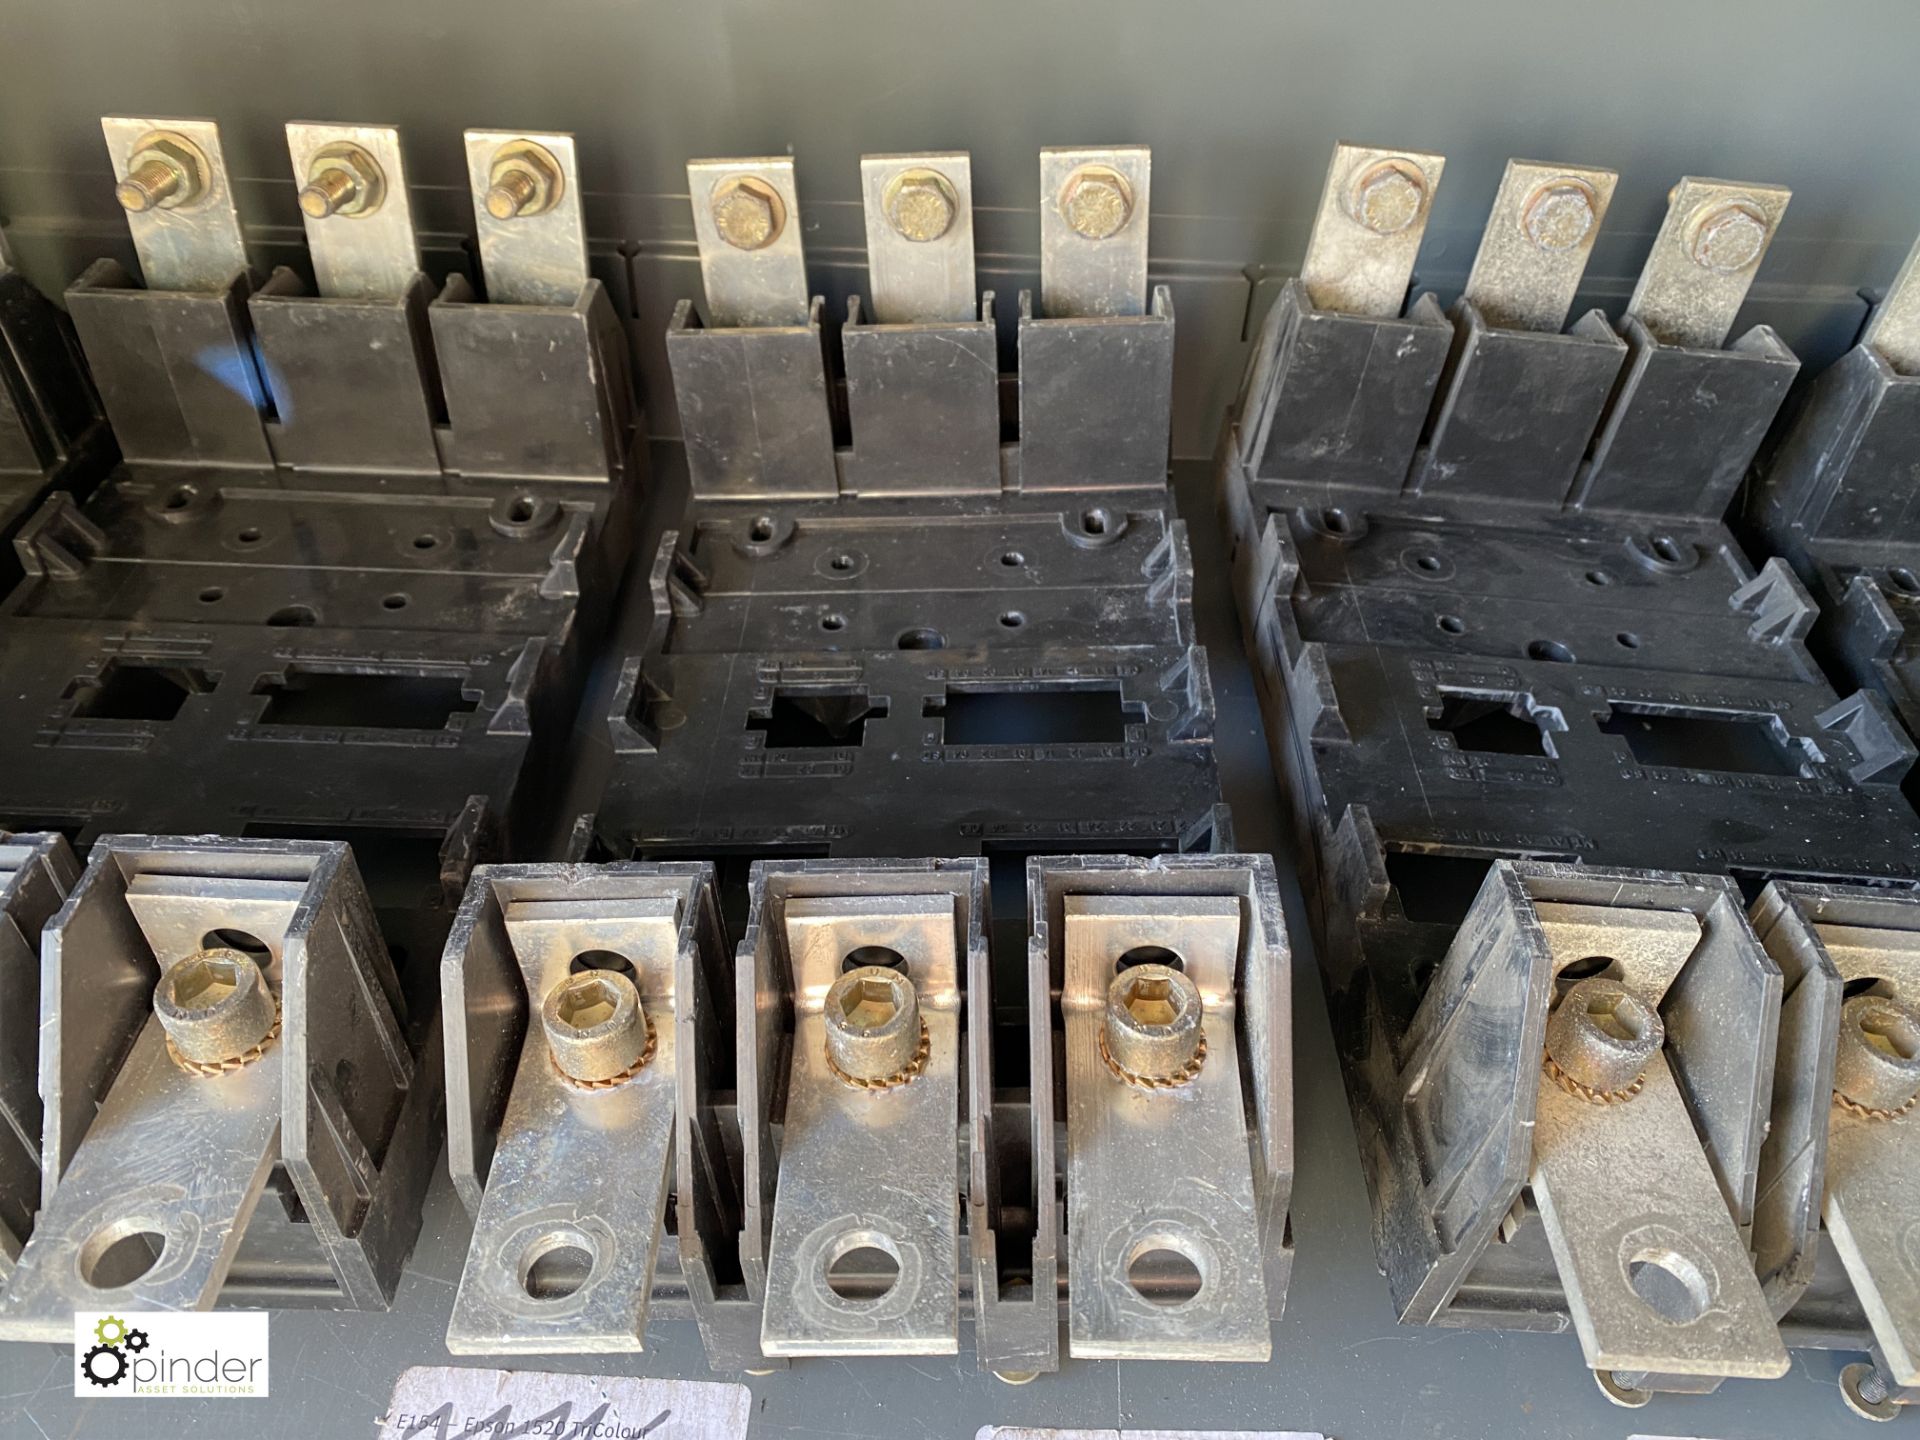 5 Merlin Gerin Compact C400H ST Circuit Breakers, with mounting bracket (container 1) (please note - Image 7 of 7